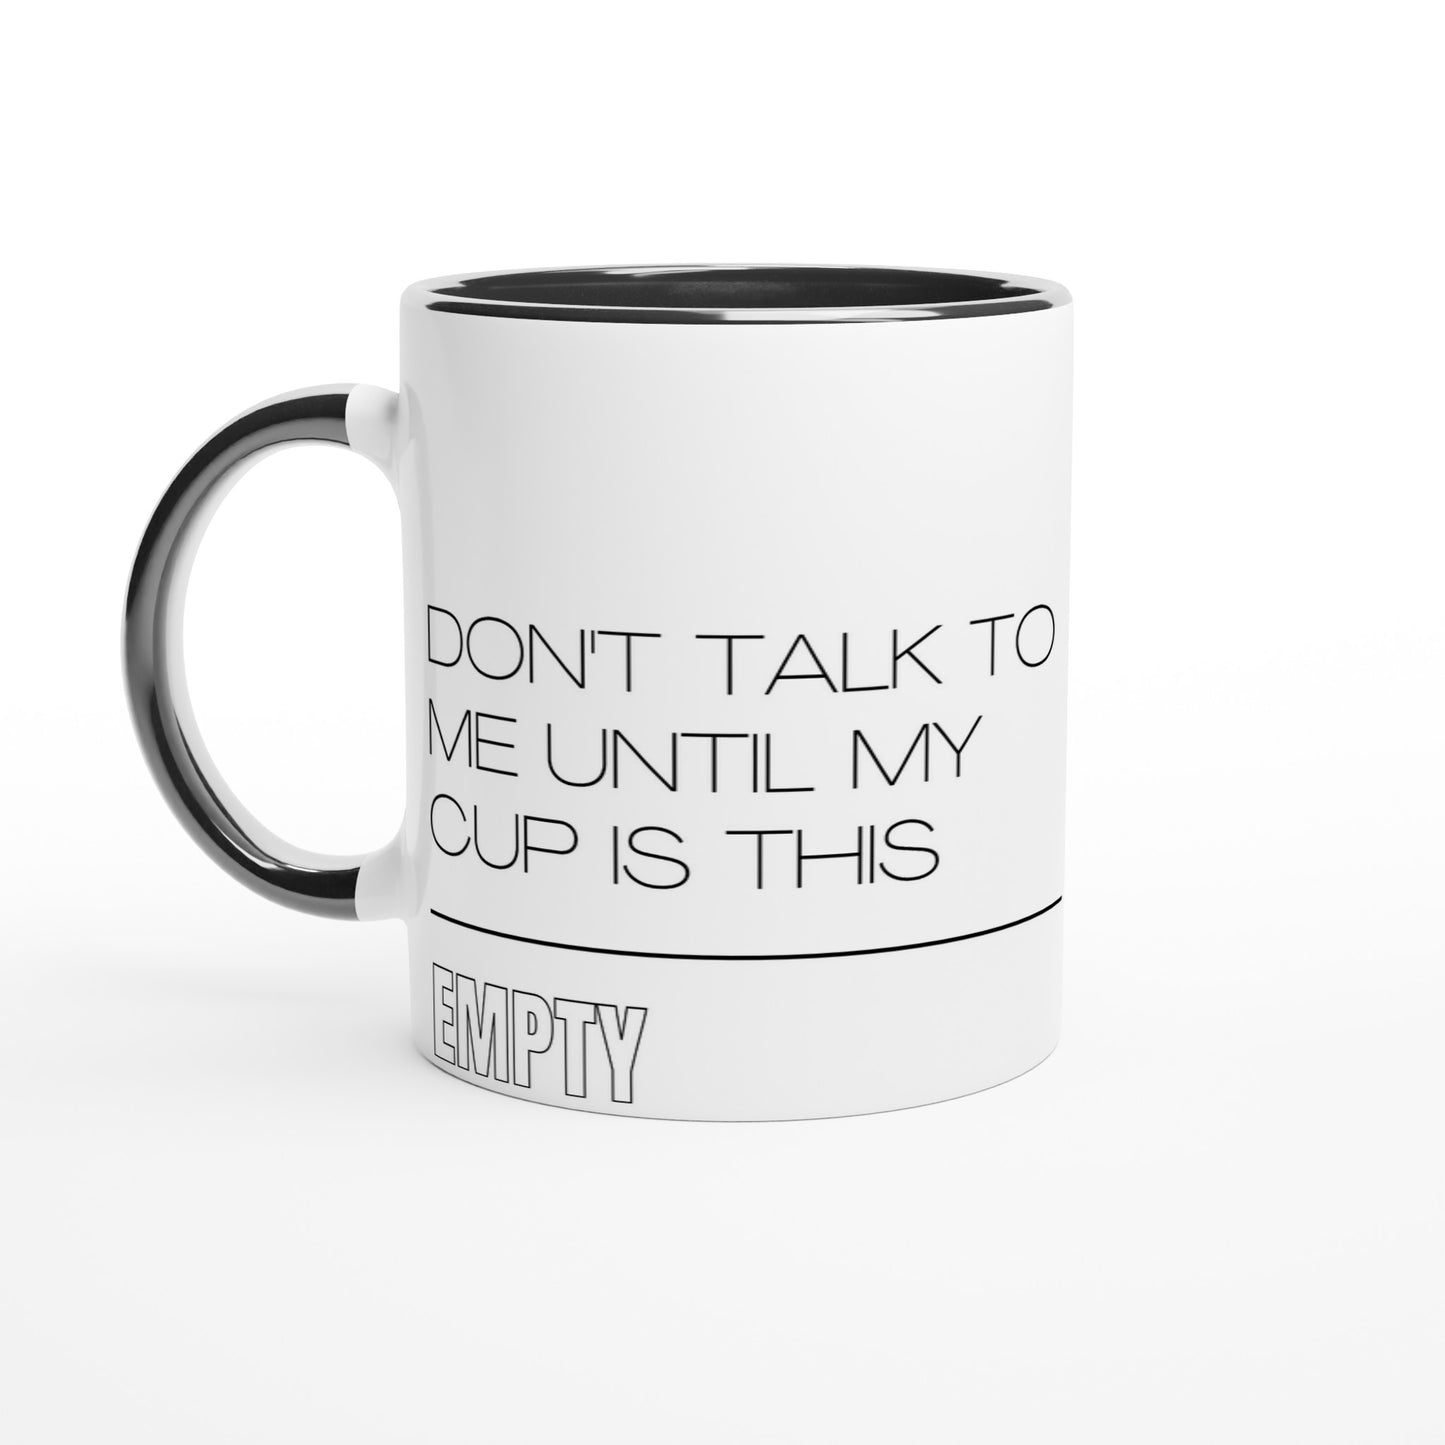 Don't Talk To Me Until My Cup Is This Empty - White 11oz Ceramic Mug with Colour Inside Ceramic Black Colour 11oz Mug Coffee Funny